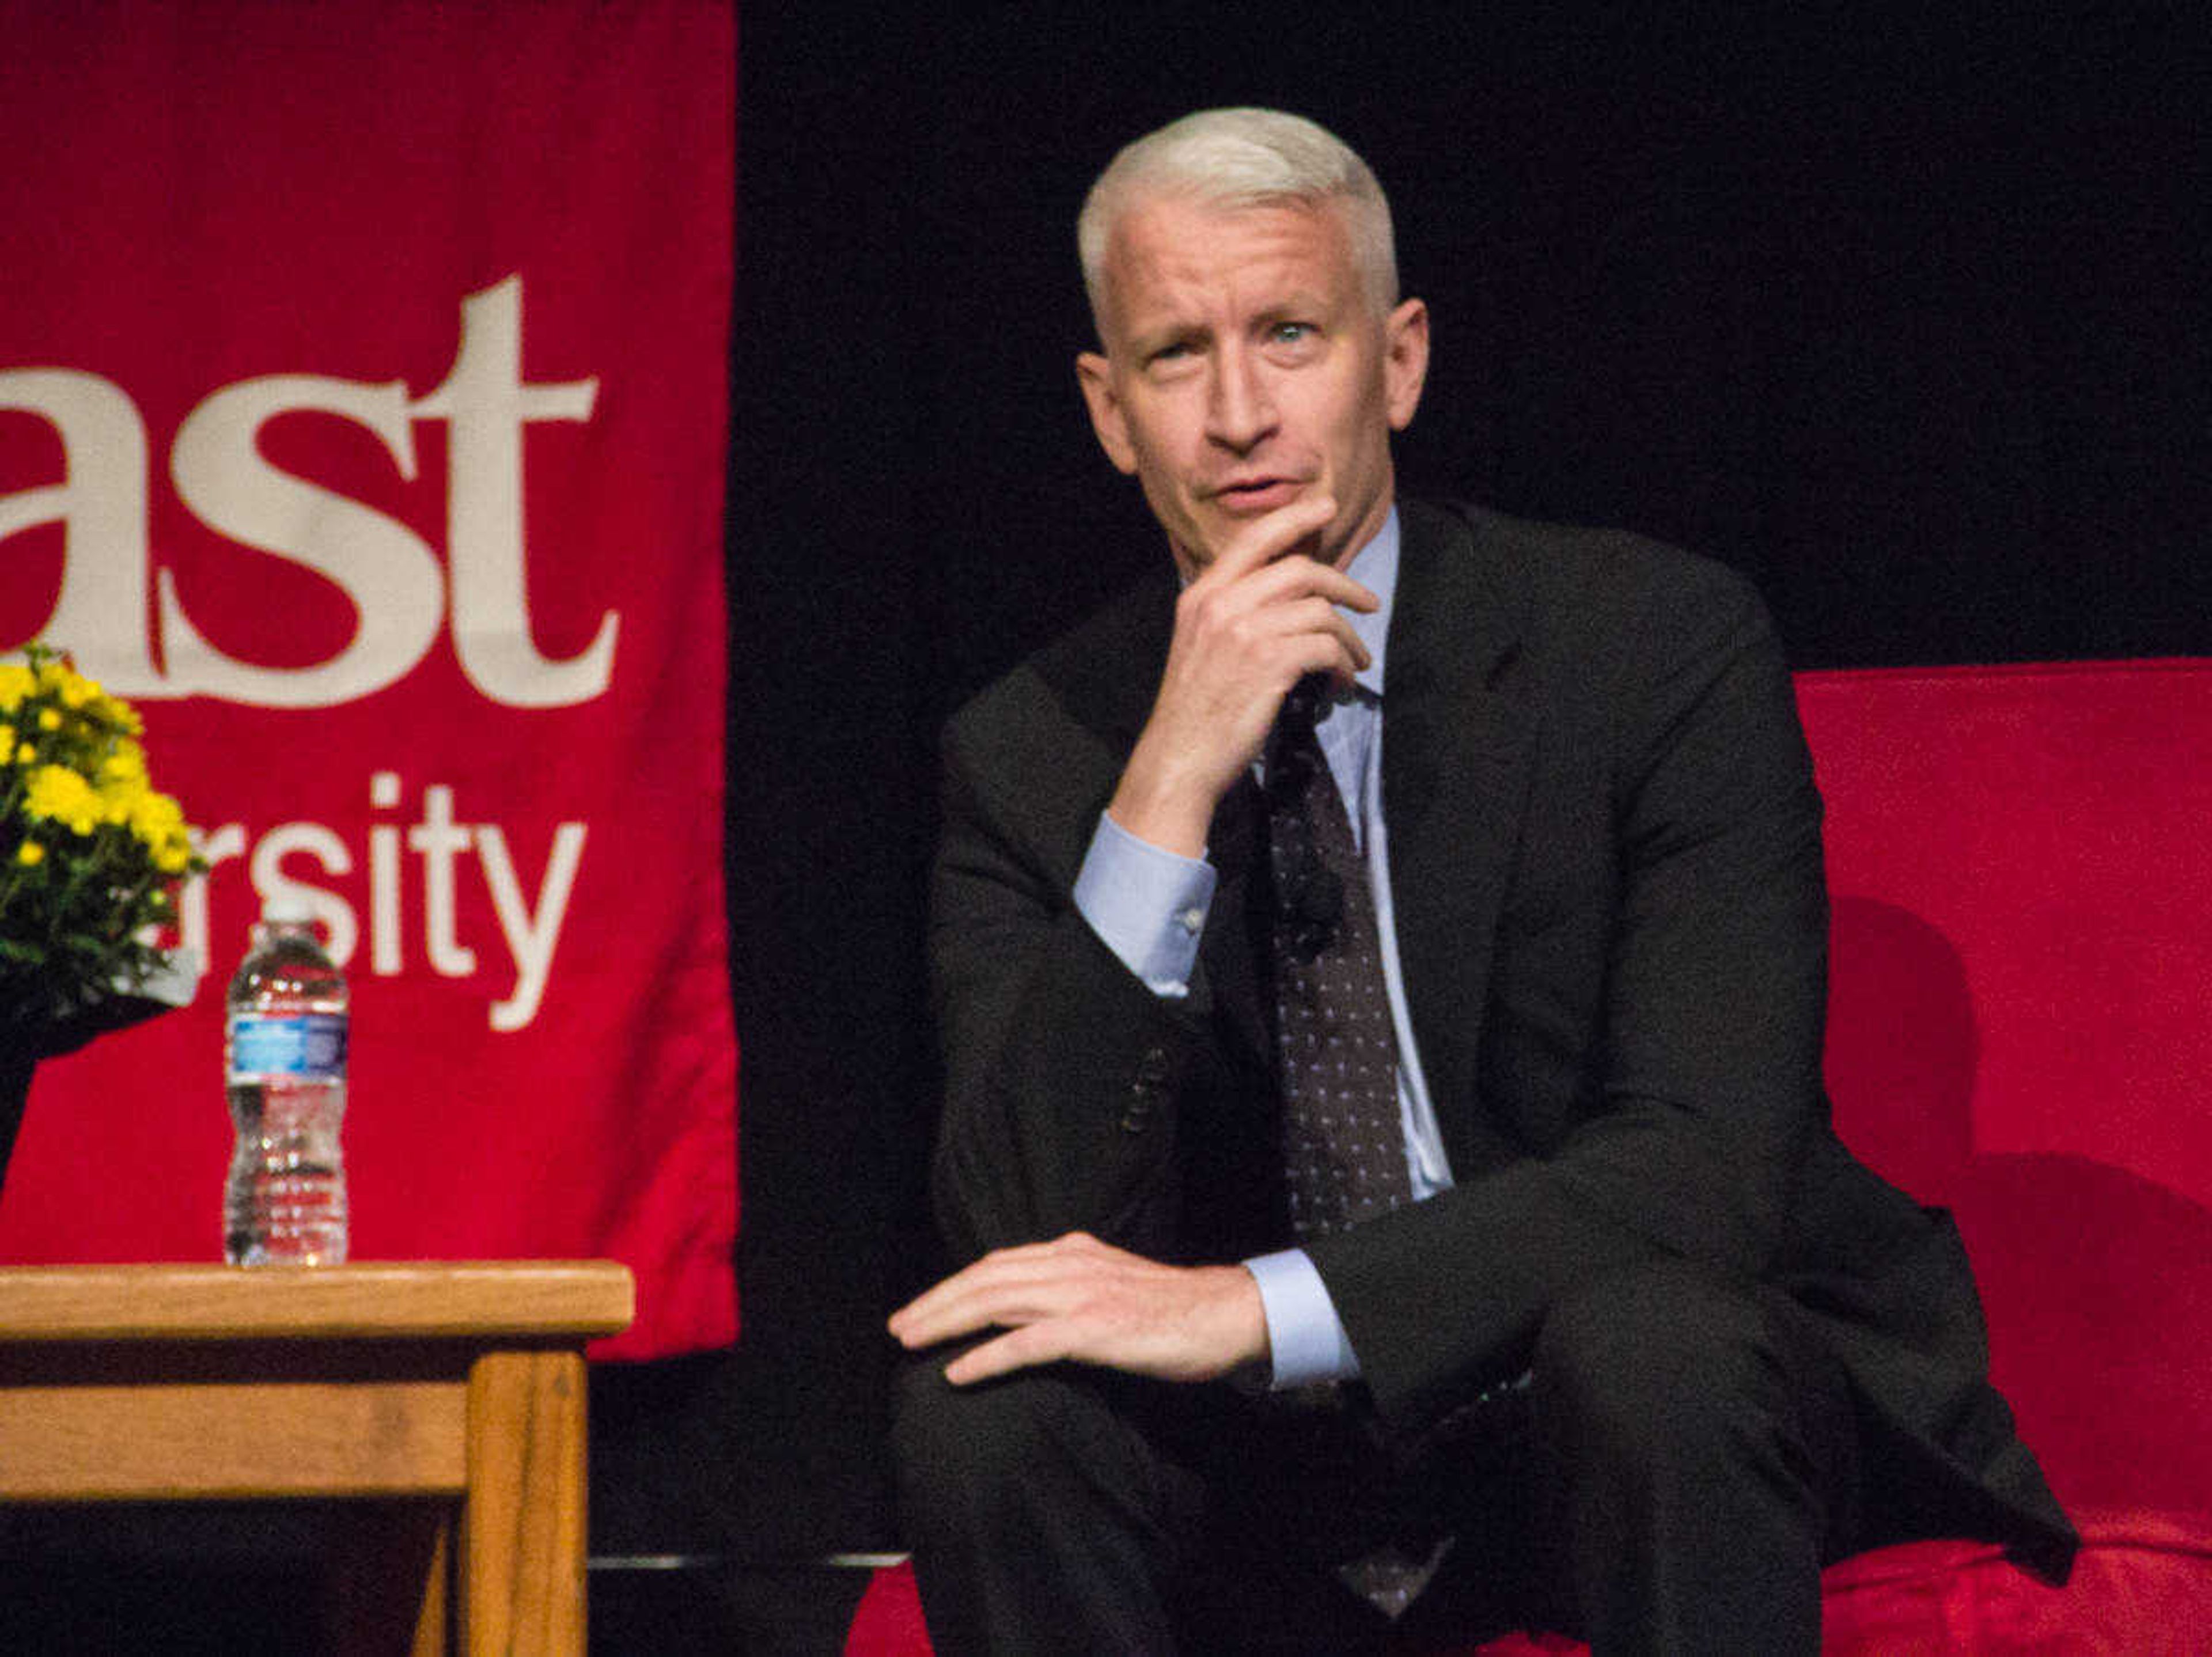 Anderson Cooper visited Southeast on Sunday and spoke about his life and past experiences he has had throughout his career as a journalist. (Photo by Zarah Laurence)